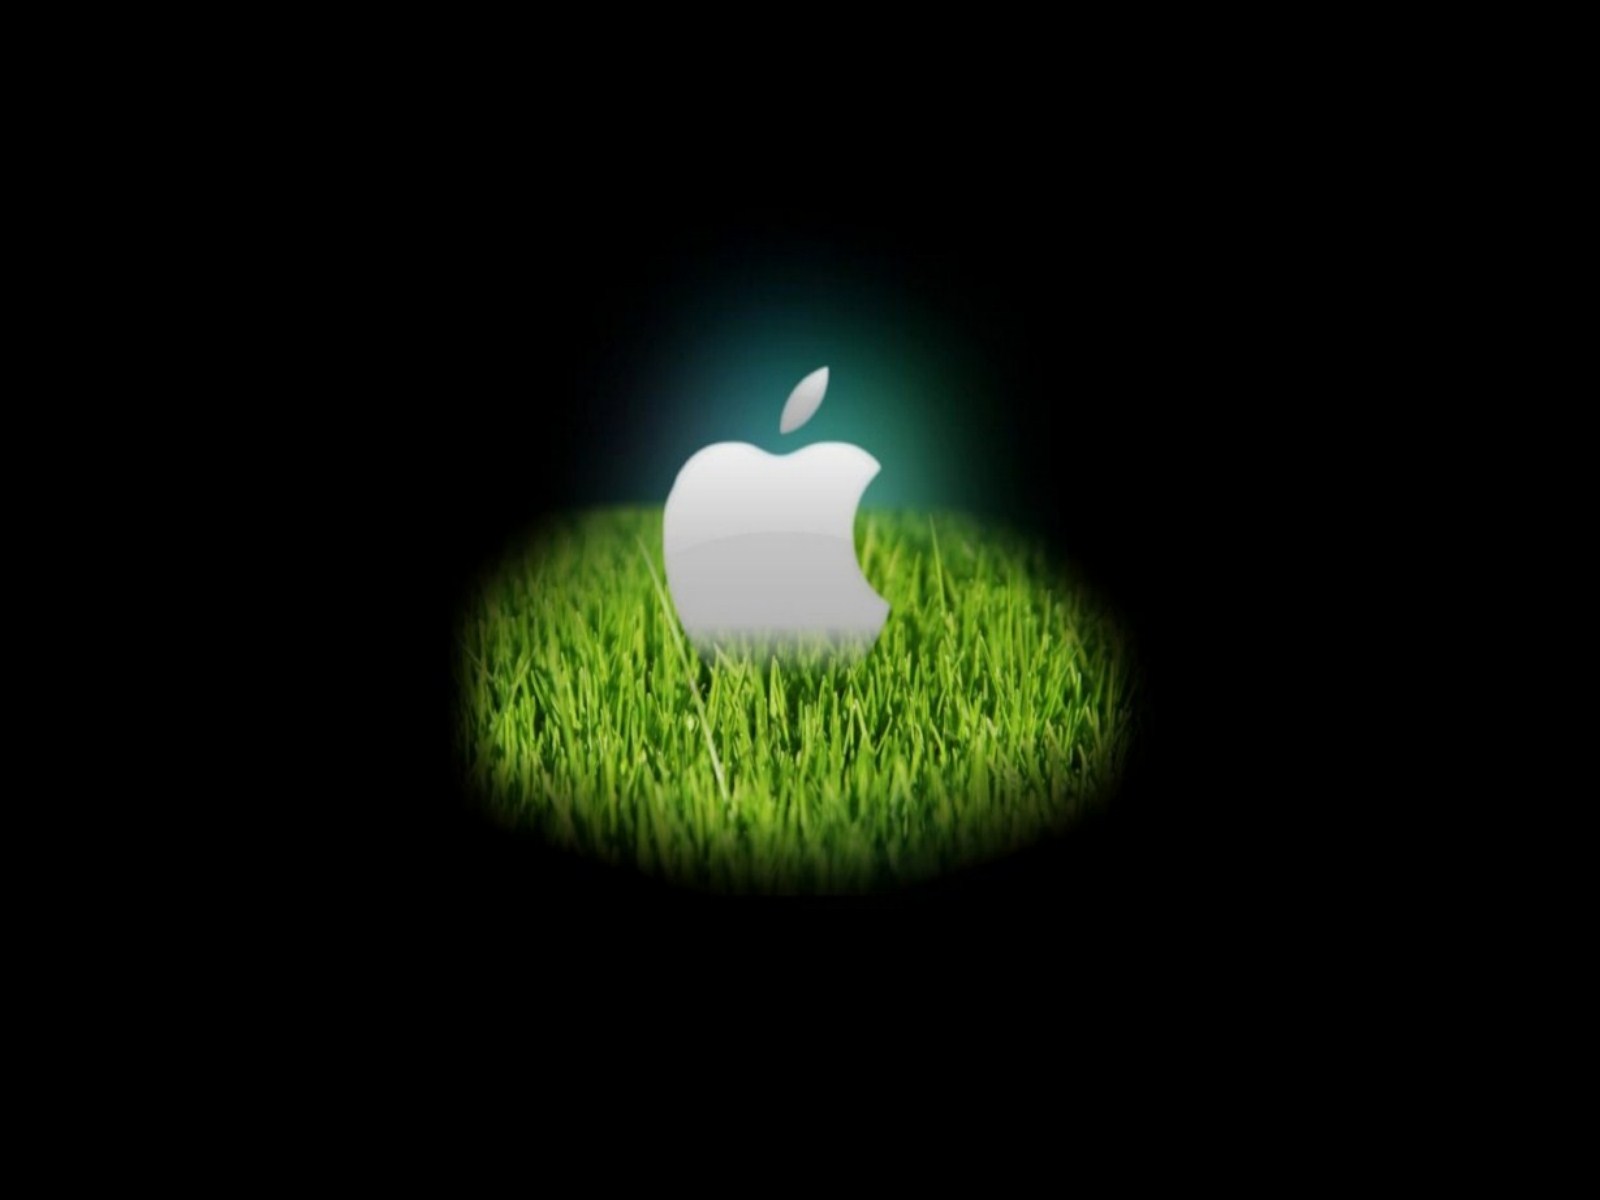 Top Wallpaper Mac Os X Snow Leopard - Iphone Logo Green And Black Image Hd , HD Wallpaper & Backgrounds